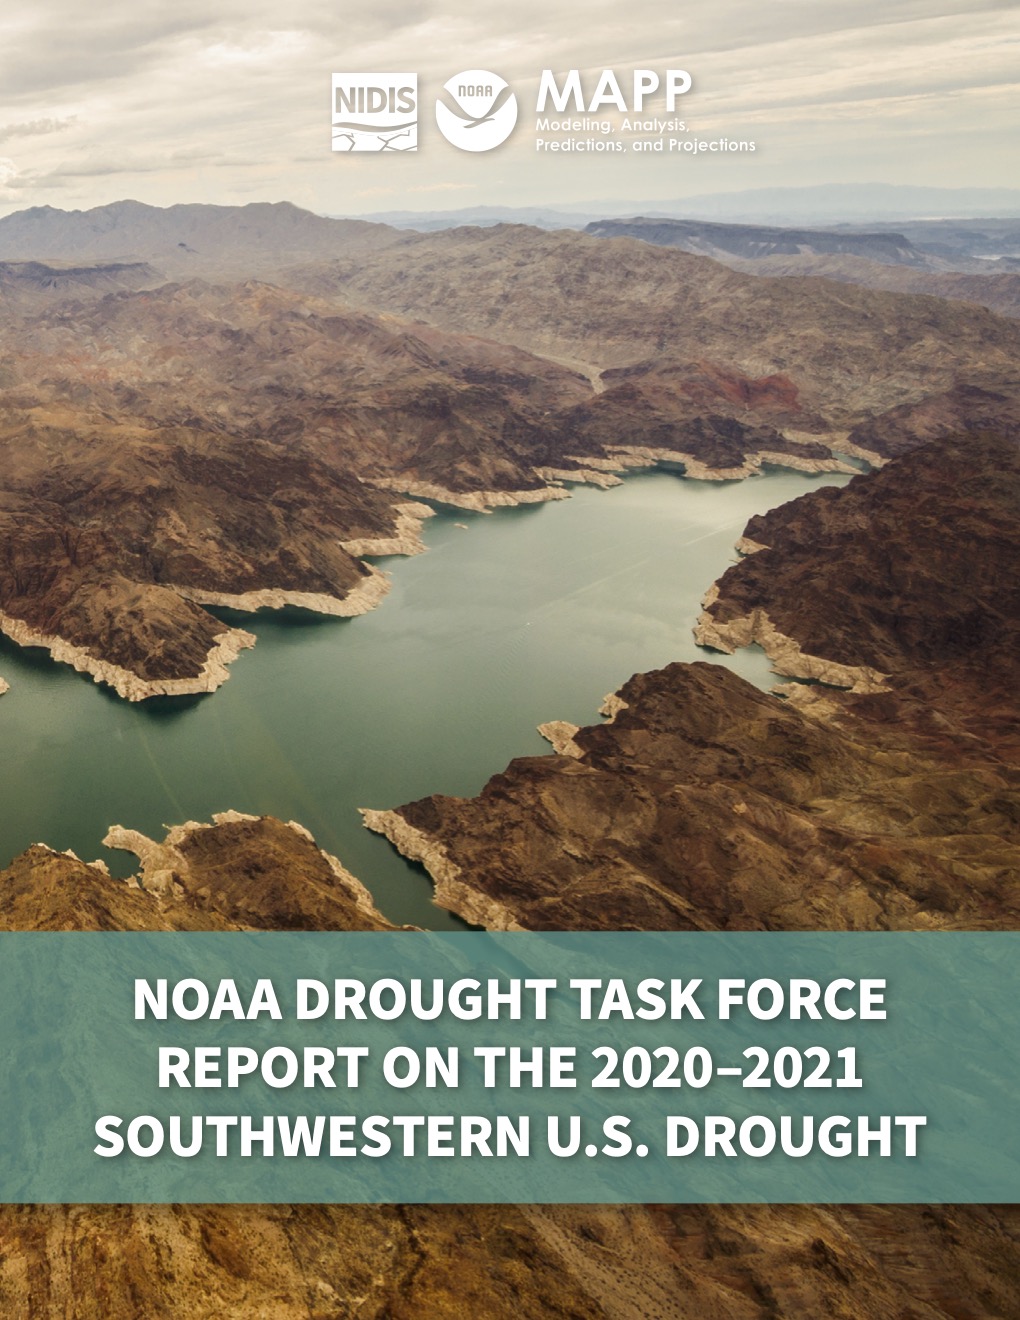 NOAA Drought Task Force Report on the 2020-2021 Southwestern U.S. Drought.